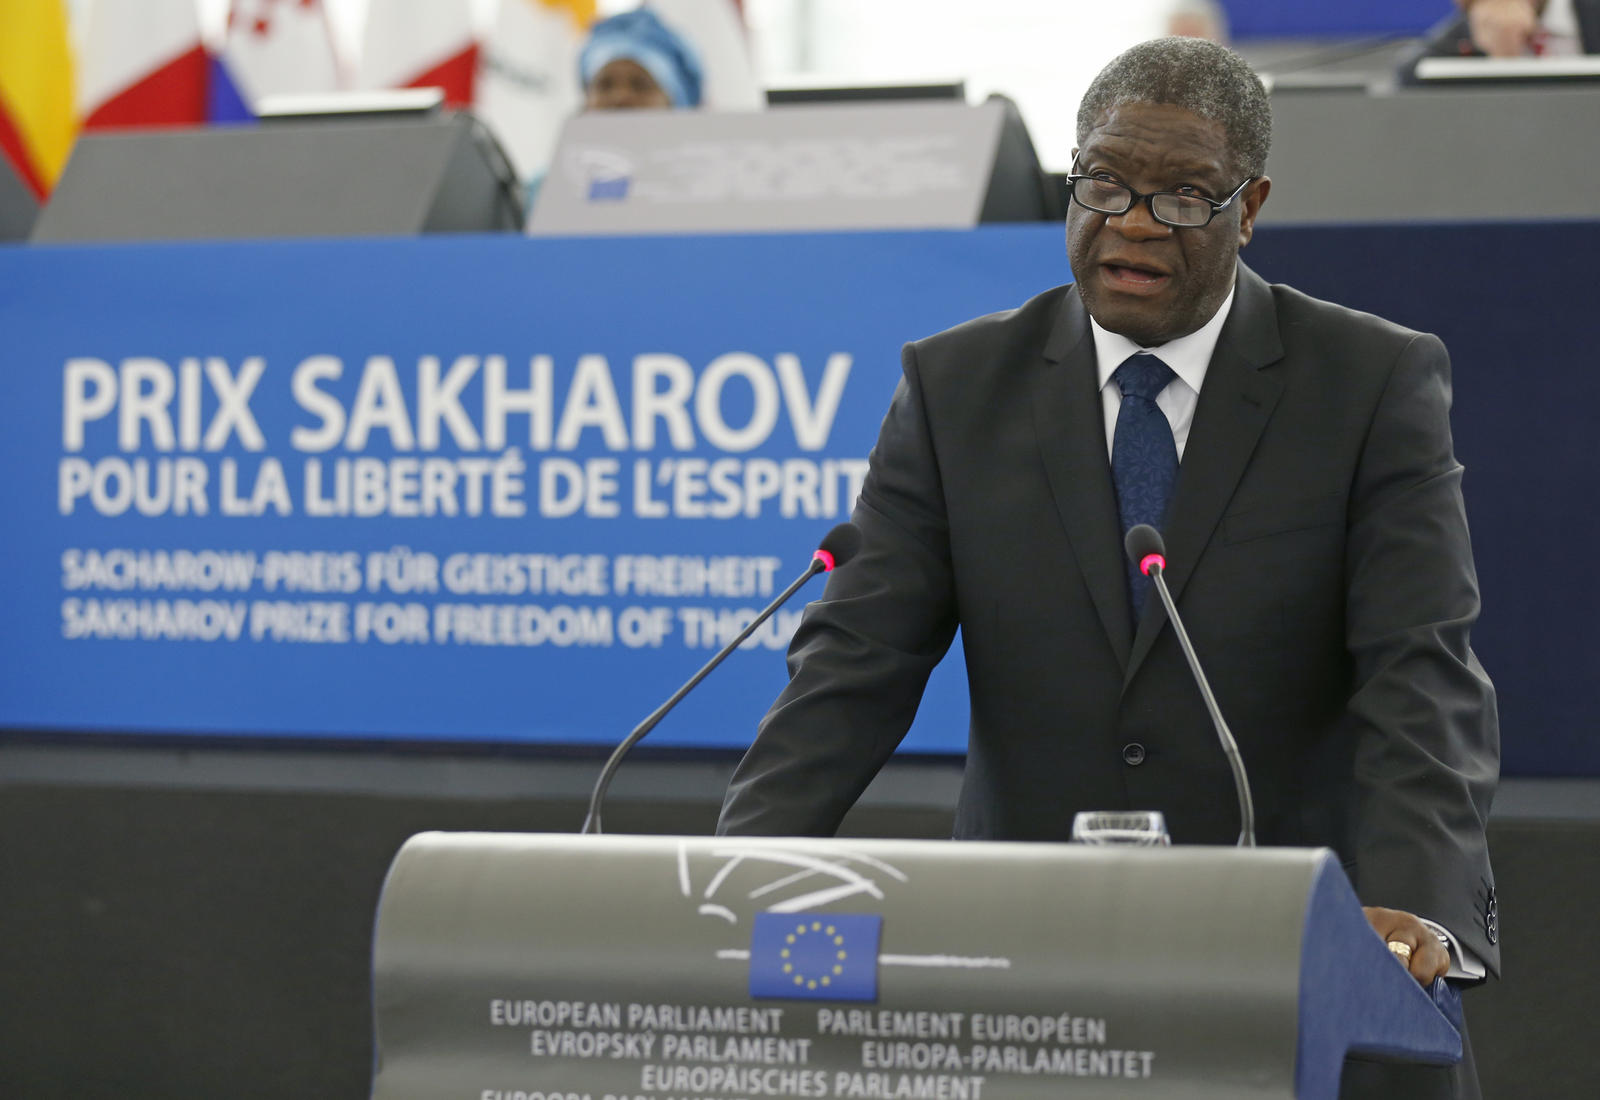 Congolese gynaecologist Mukwege delivers a speech during an award ceremony to receive his 2014 Sakharov Prize at the European Parliament in Strasbourg